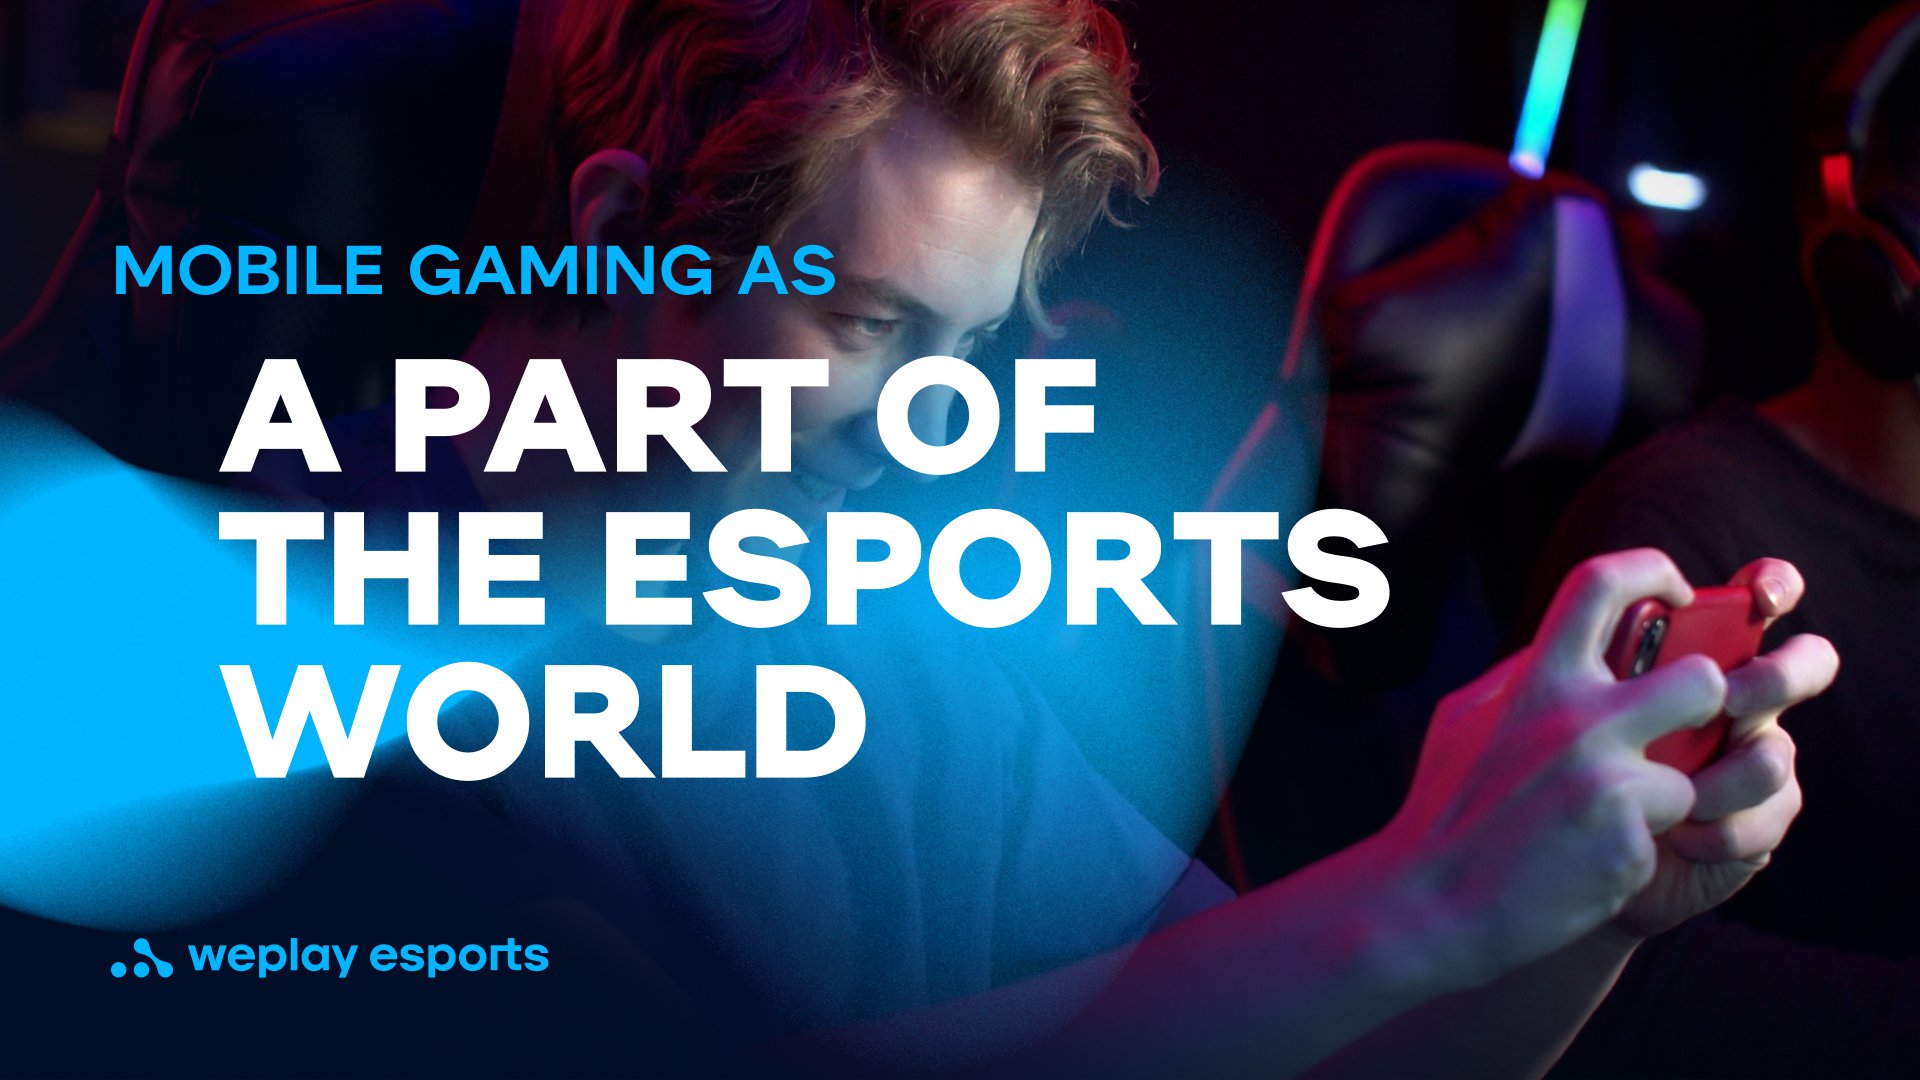 Mobile gaming as a part of the esports world. Credit: WePlay Holding